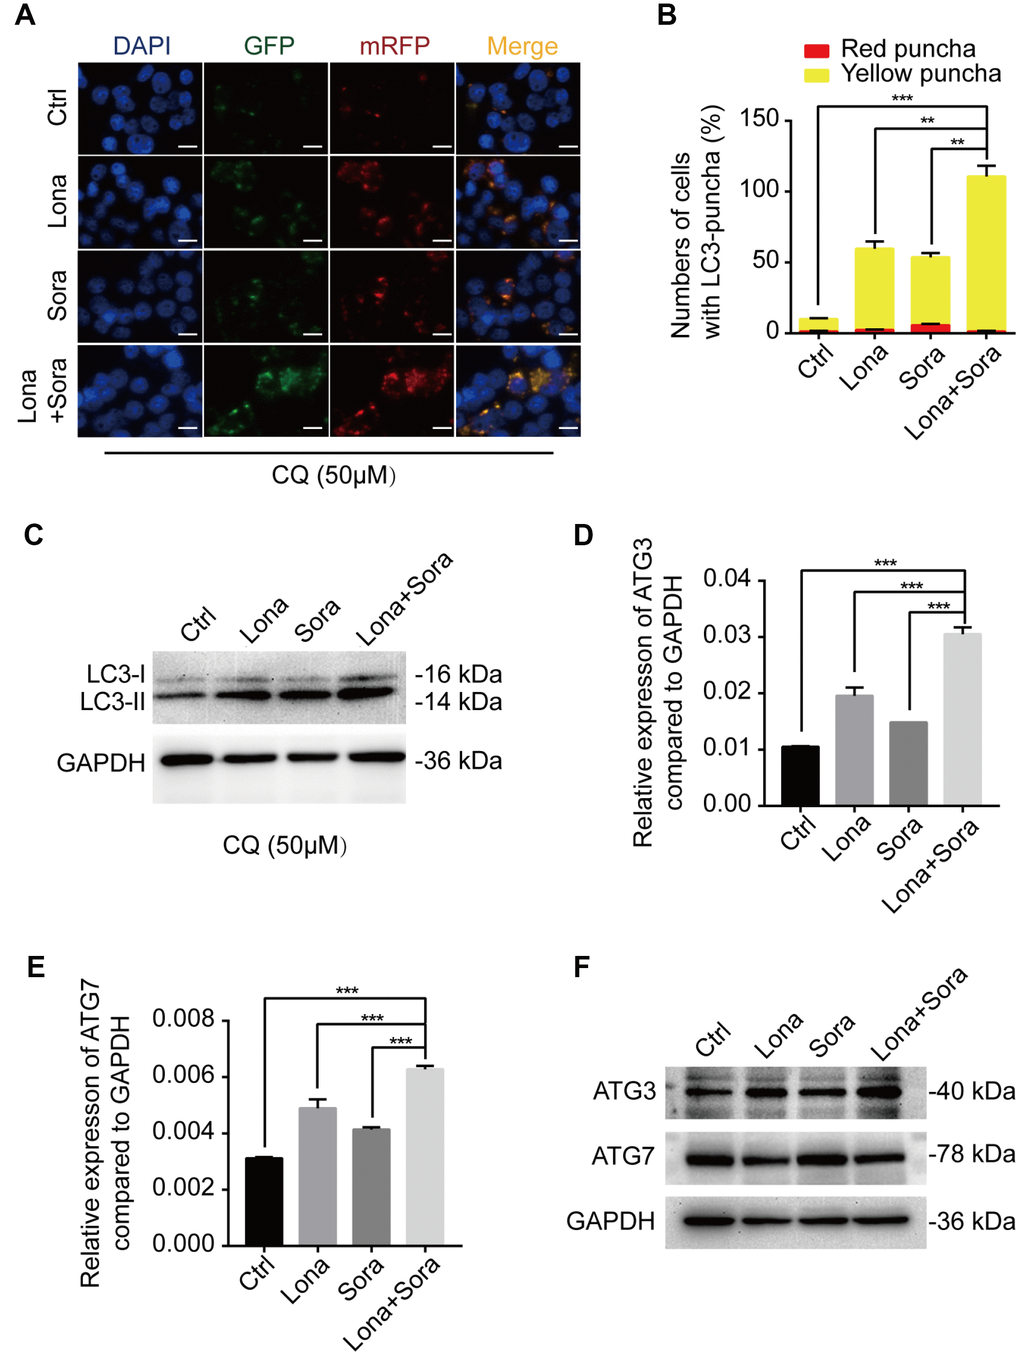 ATG3 is involved in the autophagic flux induced by lonafarnib and sorafenib co-treatment. (A) HepG2 cells were transfected with mRFP-GFP-LC3 reporter after treatment with lonafarnib (10 μM) and/or sorafenib (5 μM) plus CQ (50 μM) for 48 h. Microscopy images merged with GFP, RFP and DAPI fluorescence of representative cells. Scale bar = 10 μm. (B) The numbers of autophagosomes and autolysosomes were summarized and the data were presented as the means ± SD of triplicates. **P C) Western blot analysis of protein levels of LC3B. HepG2 cells were treated with lonafarnib and/or sorafenib in the presence of CQ (50 μM). (D) and (E) mRNA expression of ATG3 and ATG7 performed by qPCR assay. ***P F) Western blot analysis of ATG3 and ATG7 protein. HepG2 cells were treated as indicated.